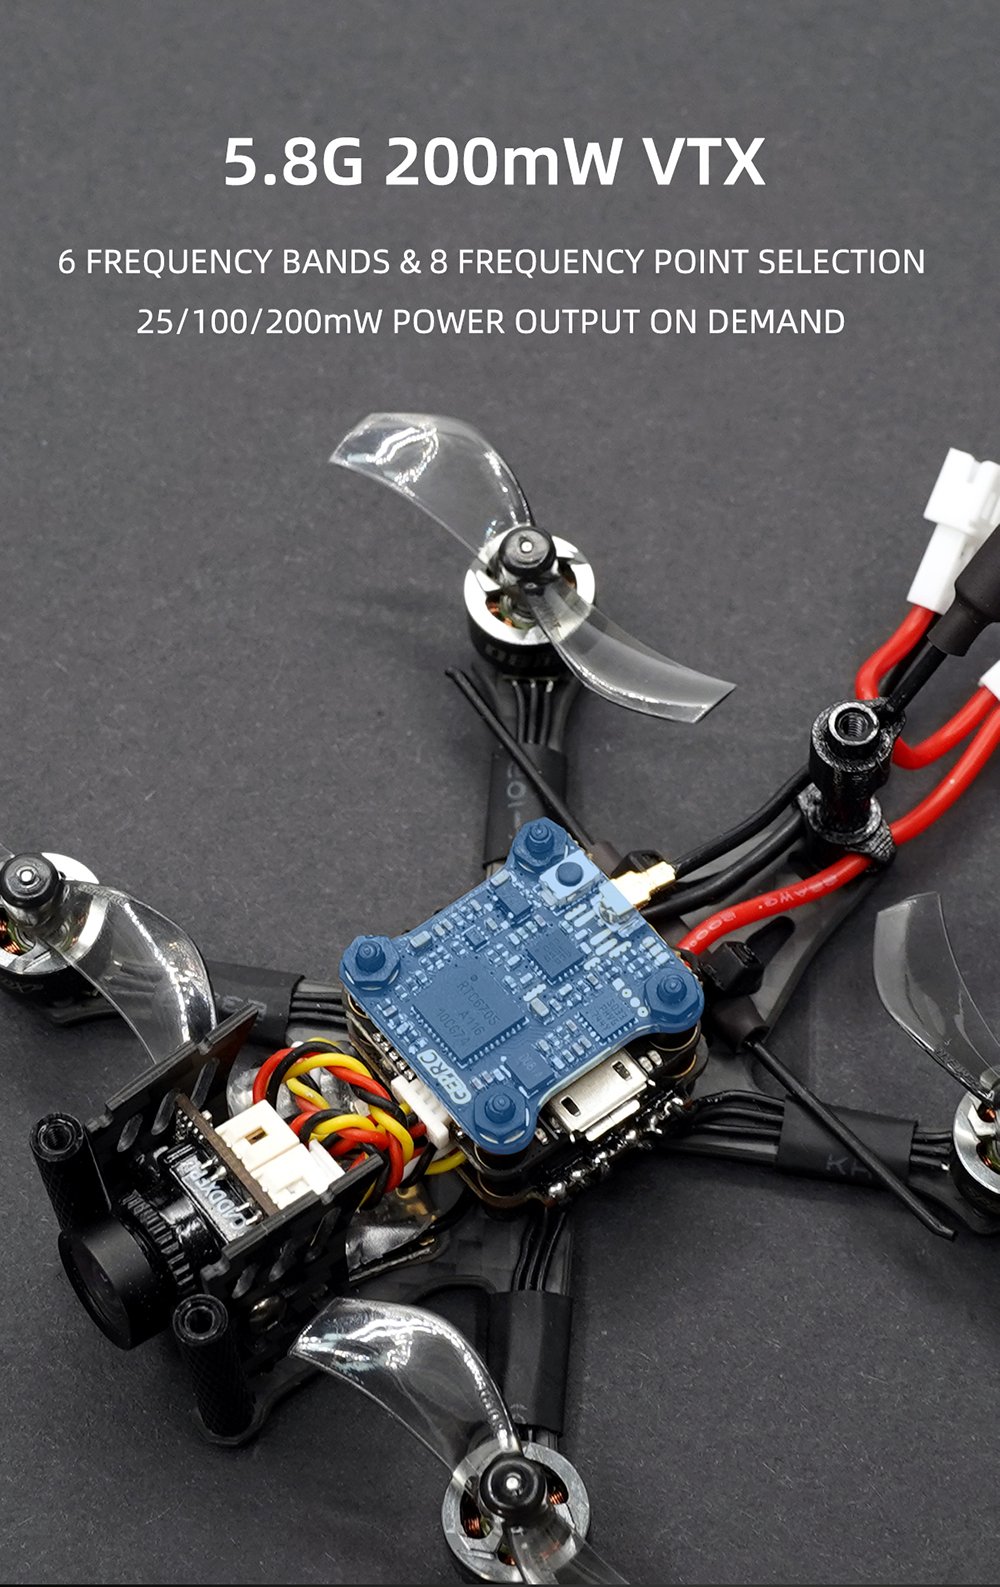 GEPRC-SMART16-78mm-2S-Freestyle-Analog-FPV-Racing-Drone-BNF-Caddx-Ant-Camera-F411-FC-12A-BLheli_S-4I-1916825-5